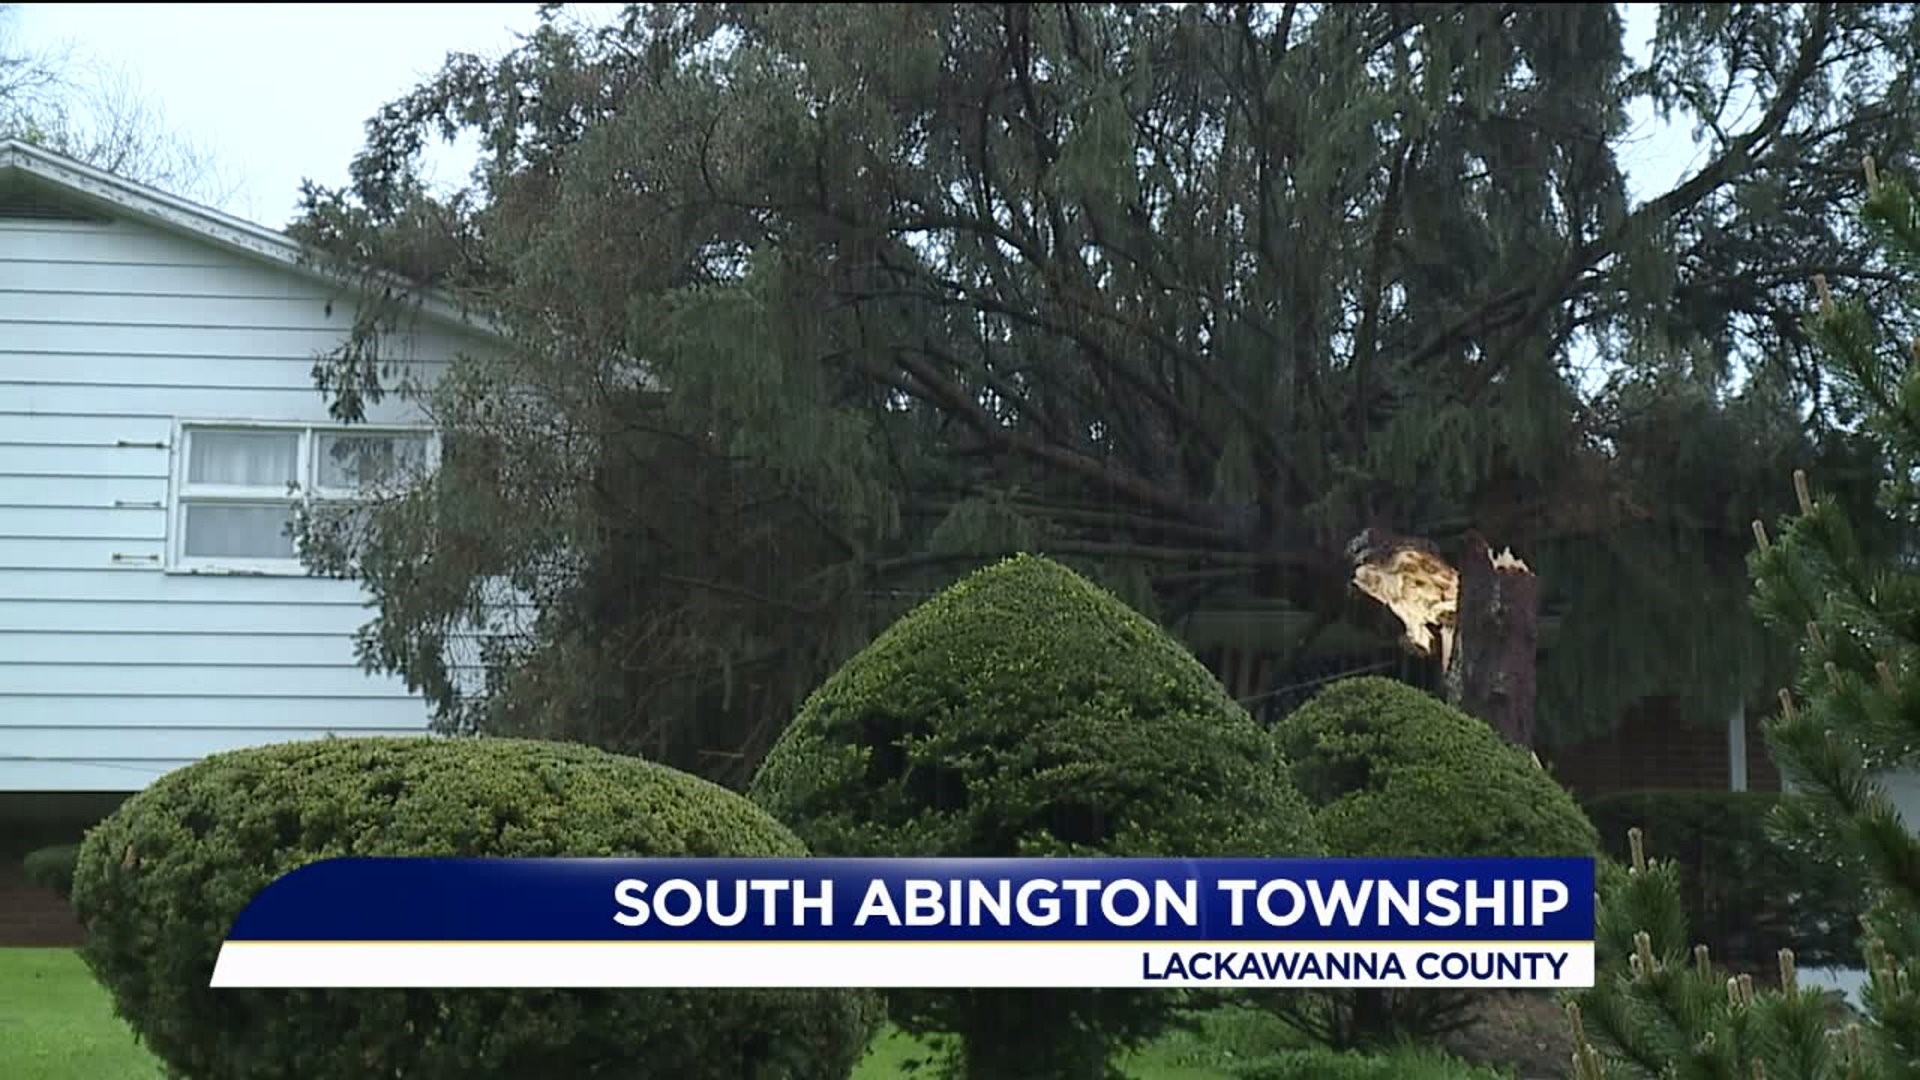 Man Injured After Tree Hits Home, Storm Damage in Lackawanna County